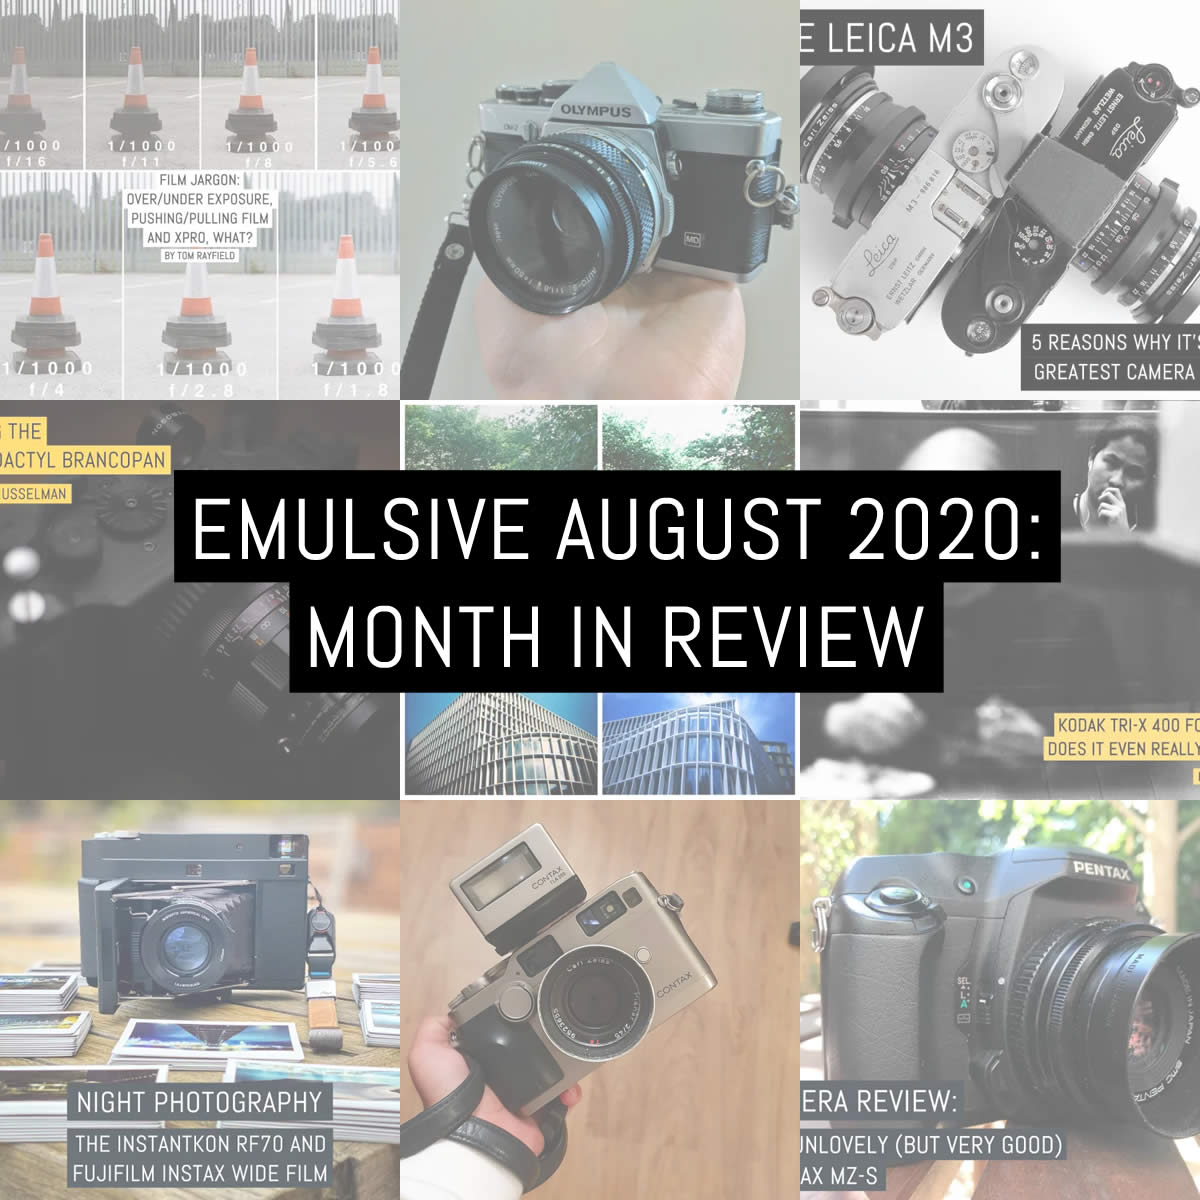 Month in review: August 2020